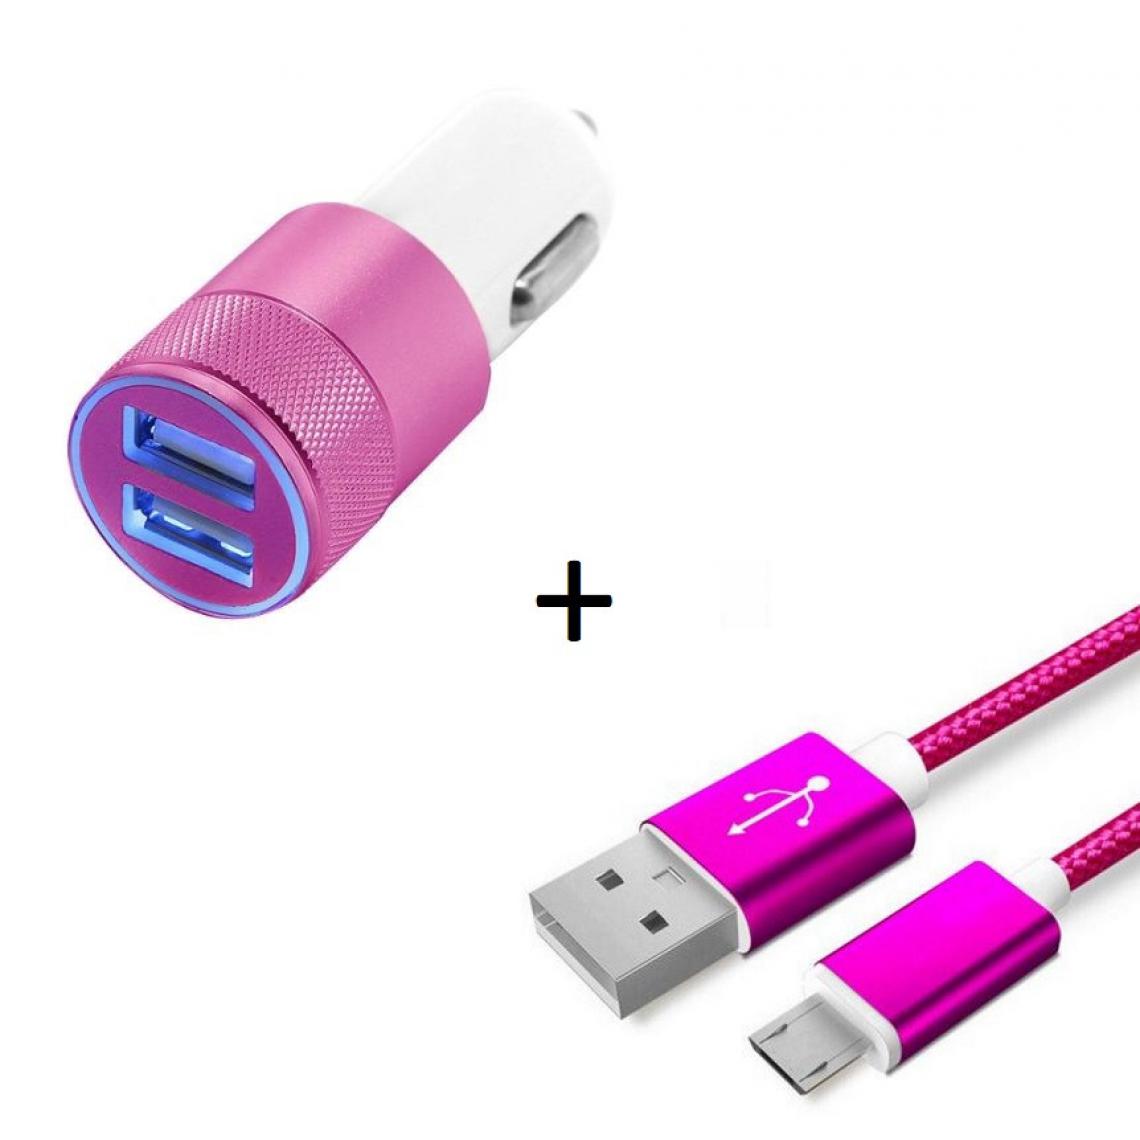 Shot - Pack Chargeur Voiture pour SAMSUNG Galaxy J6+ Smartphone Micro USB (Cable Metal Nylon + Double Adaptateur Allume Cigare) (ROSE) - Chargeur Voiture 12V